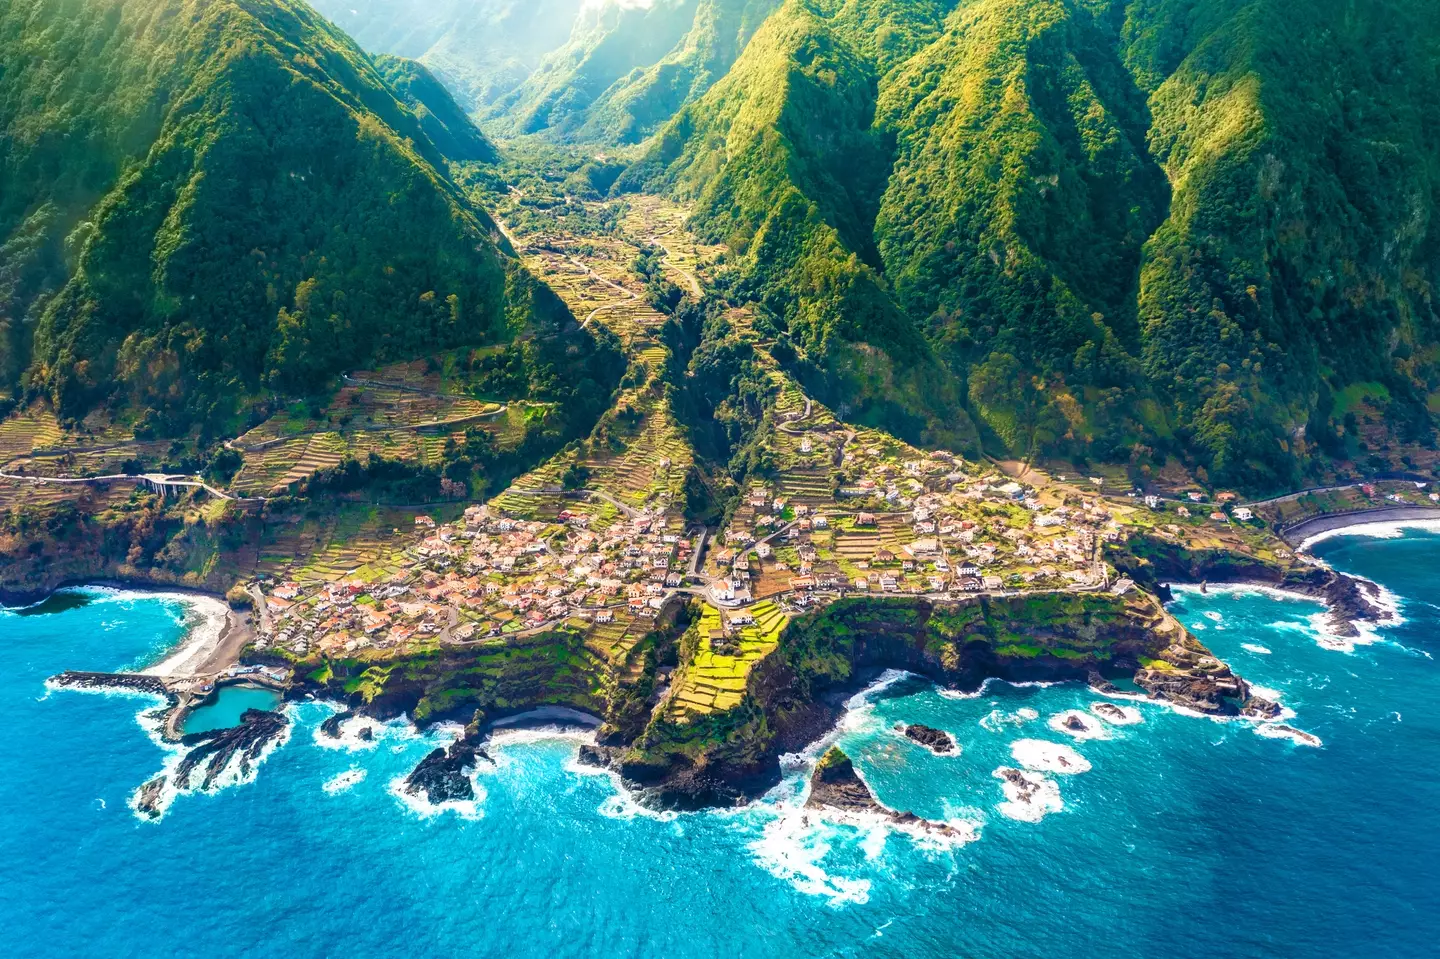 Here it is - the beautiful island of Madeira.